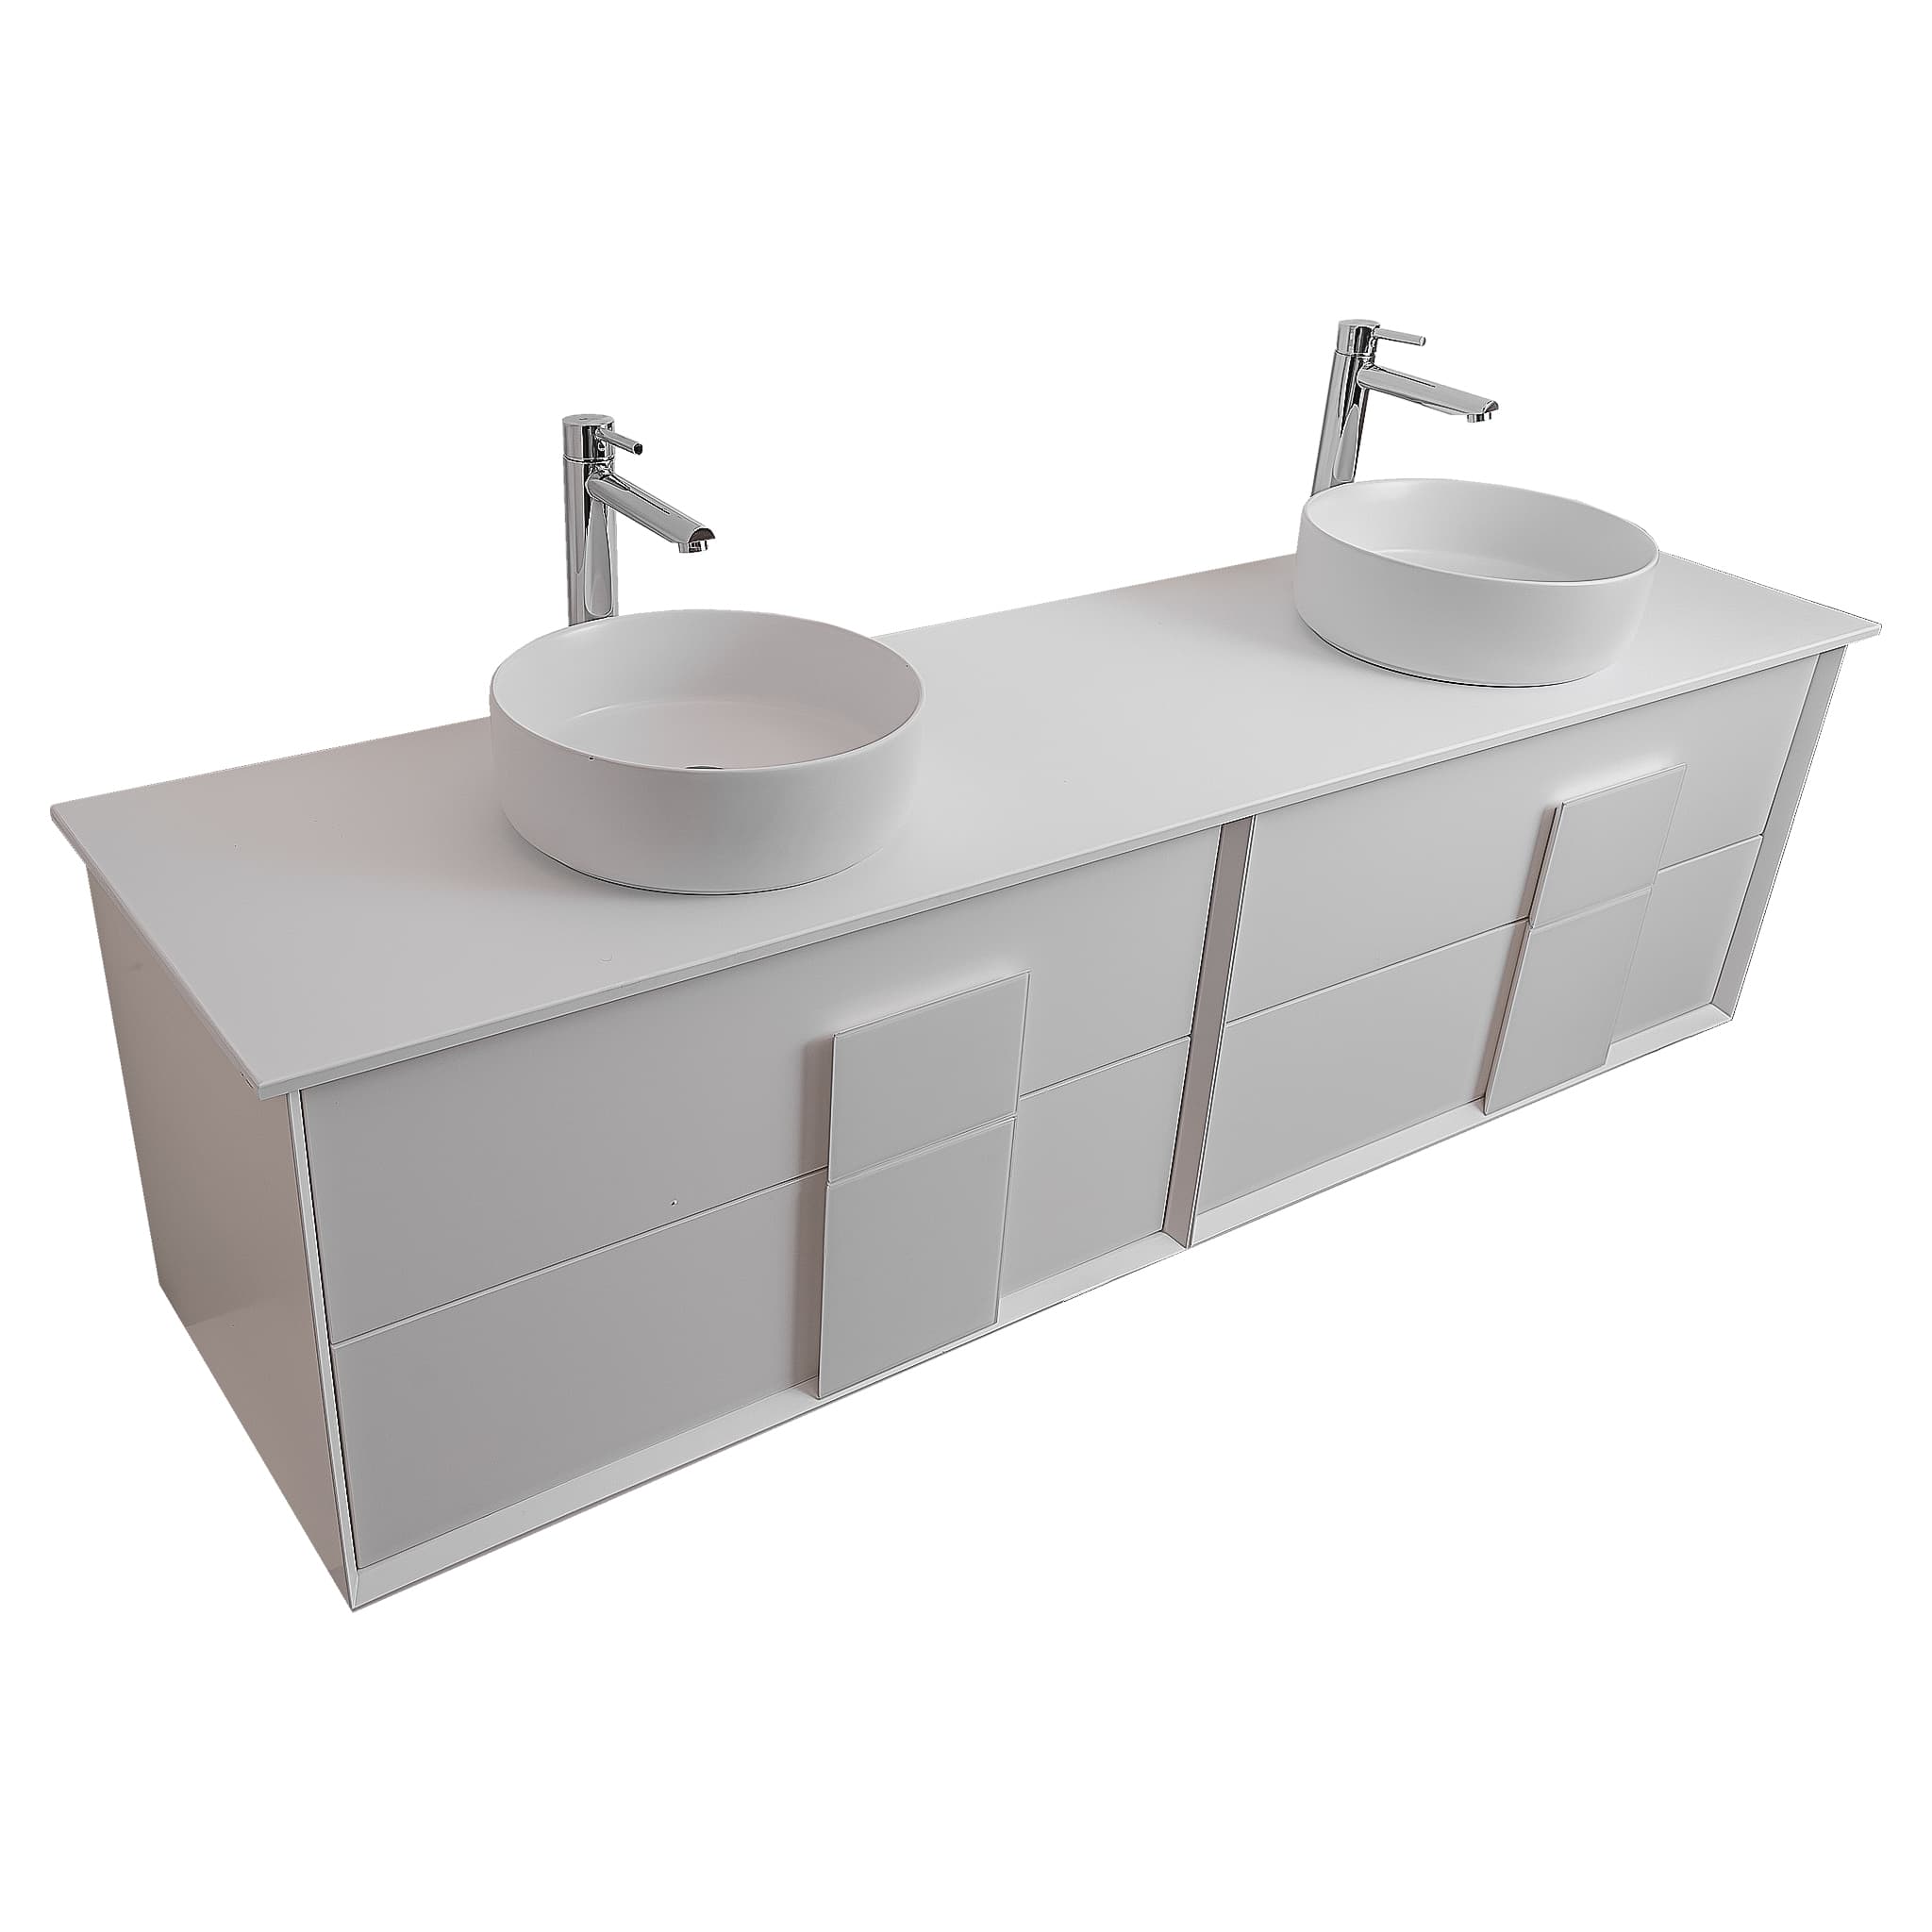 Piazza 63 Matte White With White Handle Cabinet, Ares White Top and Two Ares White Ceramic Basin, Wall Mounted Modern Vanity Set